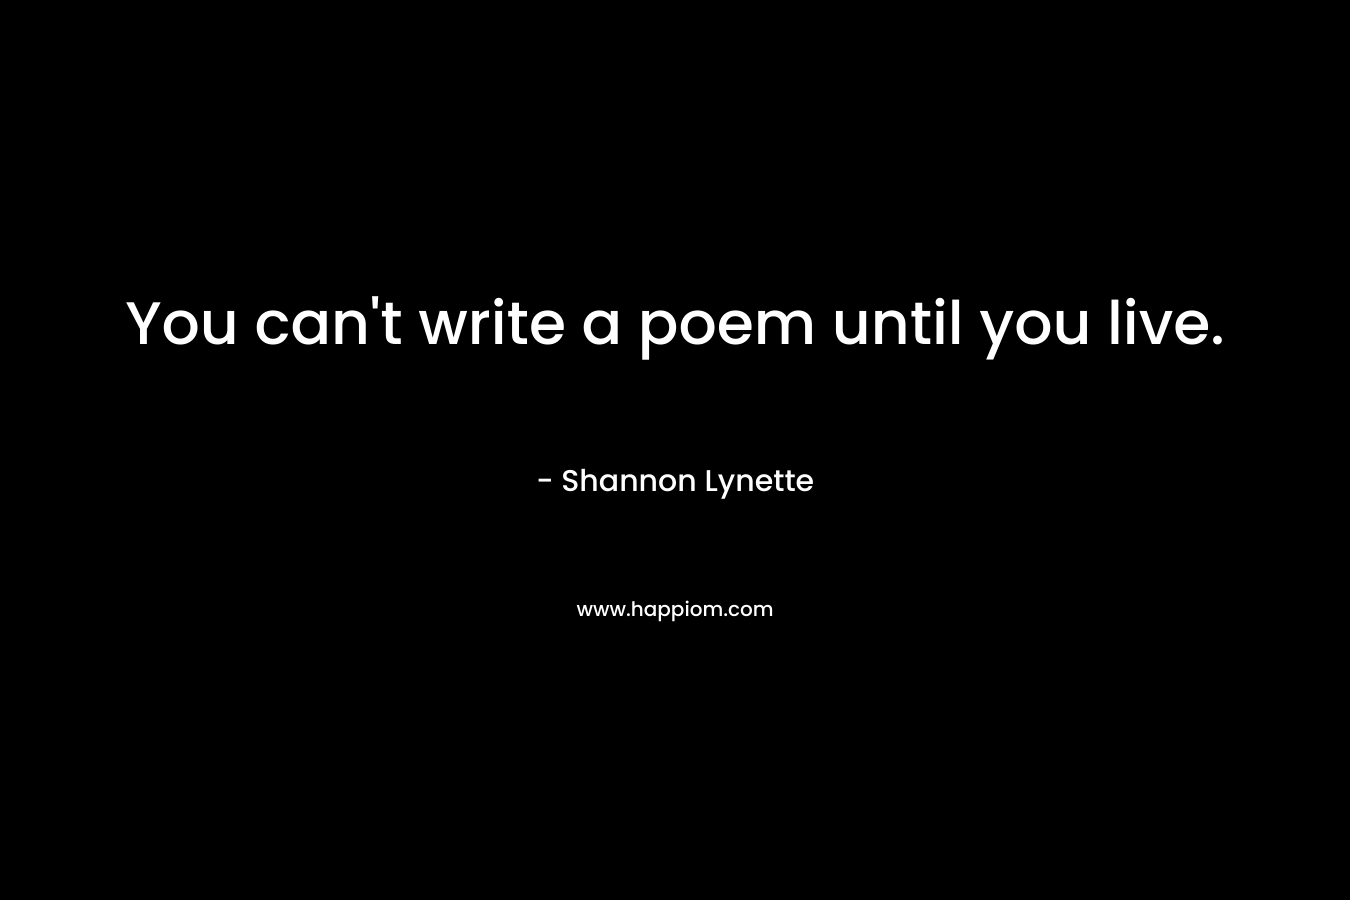 You can't write a poem until you live.